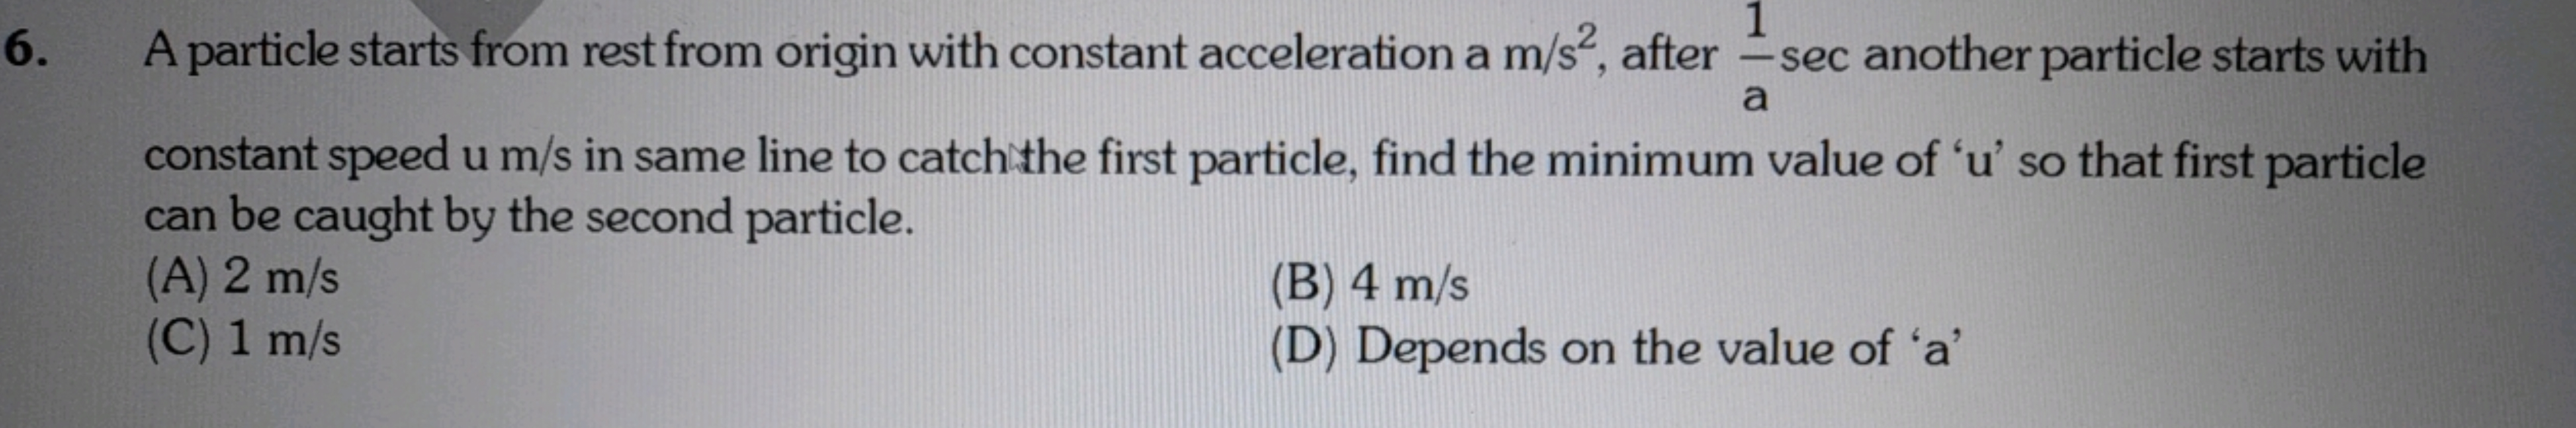 A particle starts from rest from origin with constant acceleration a m